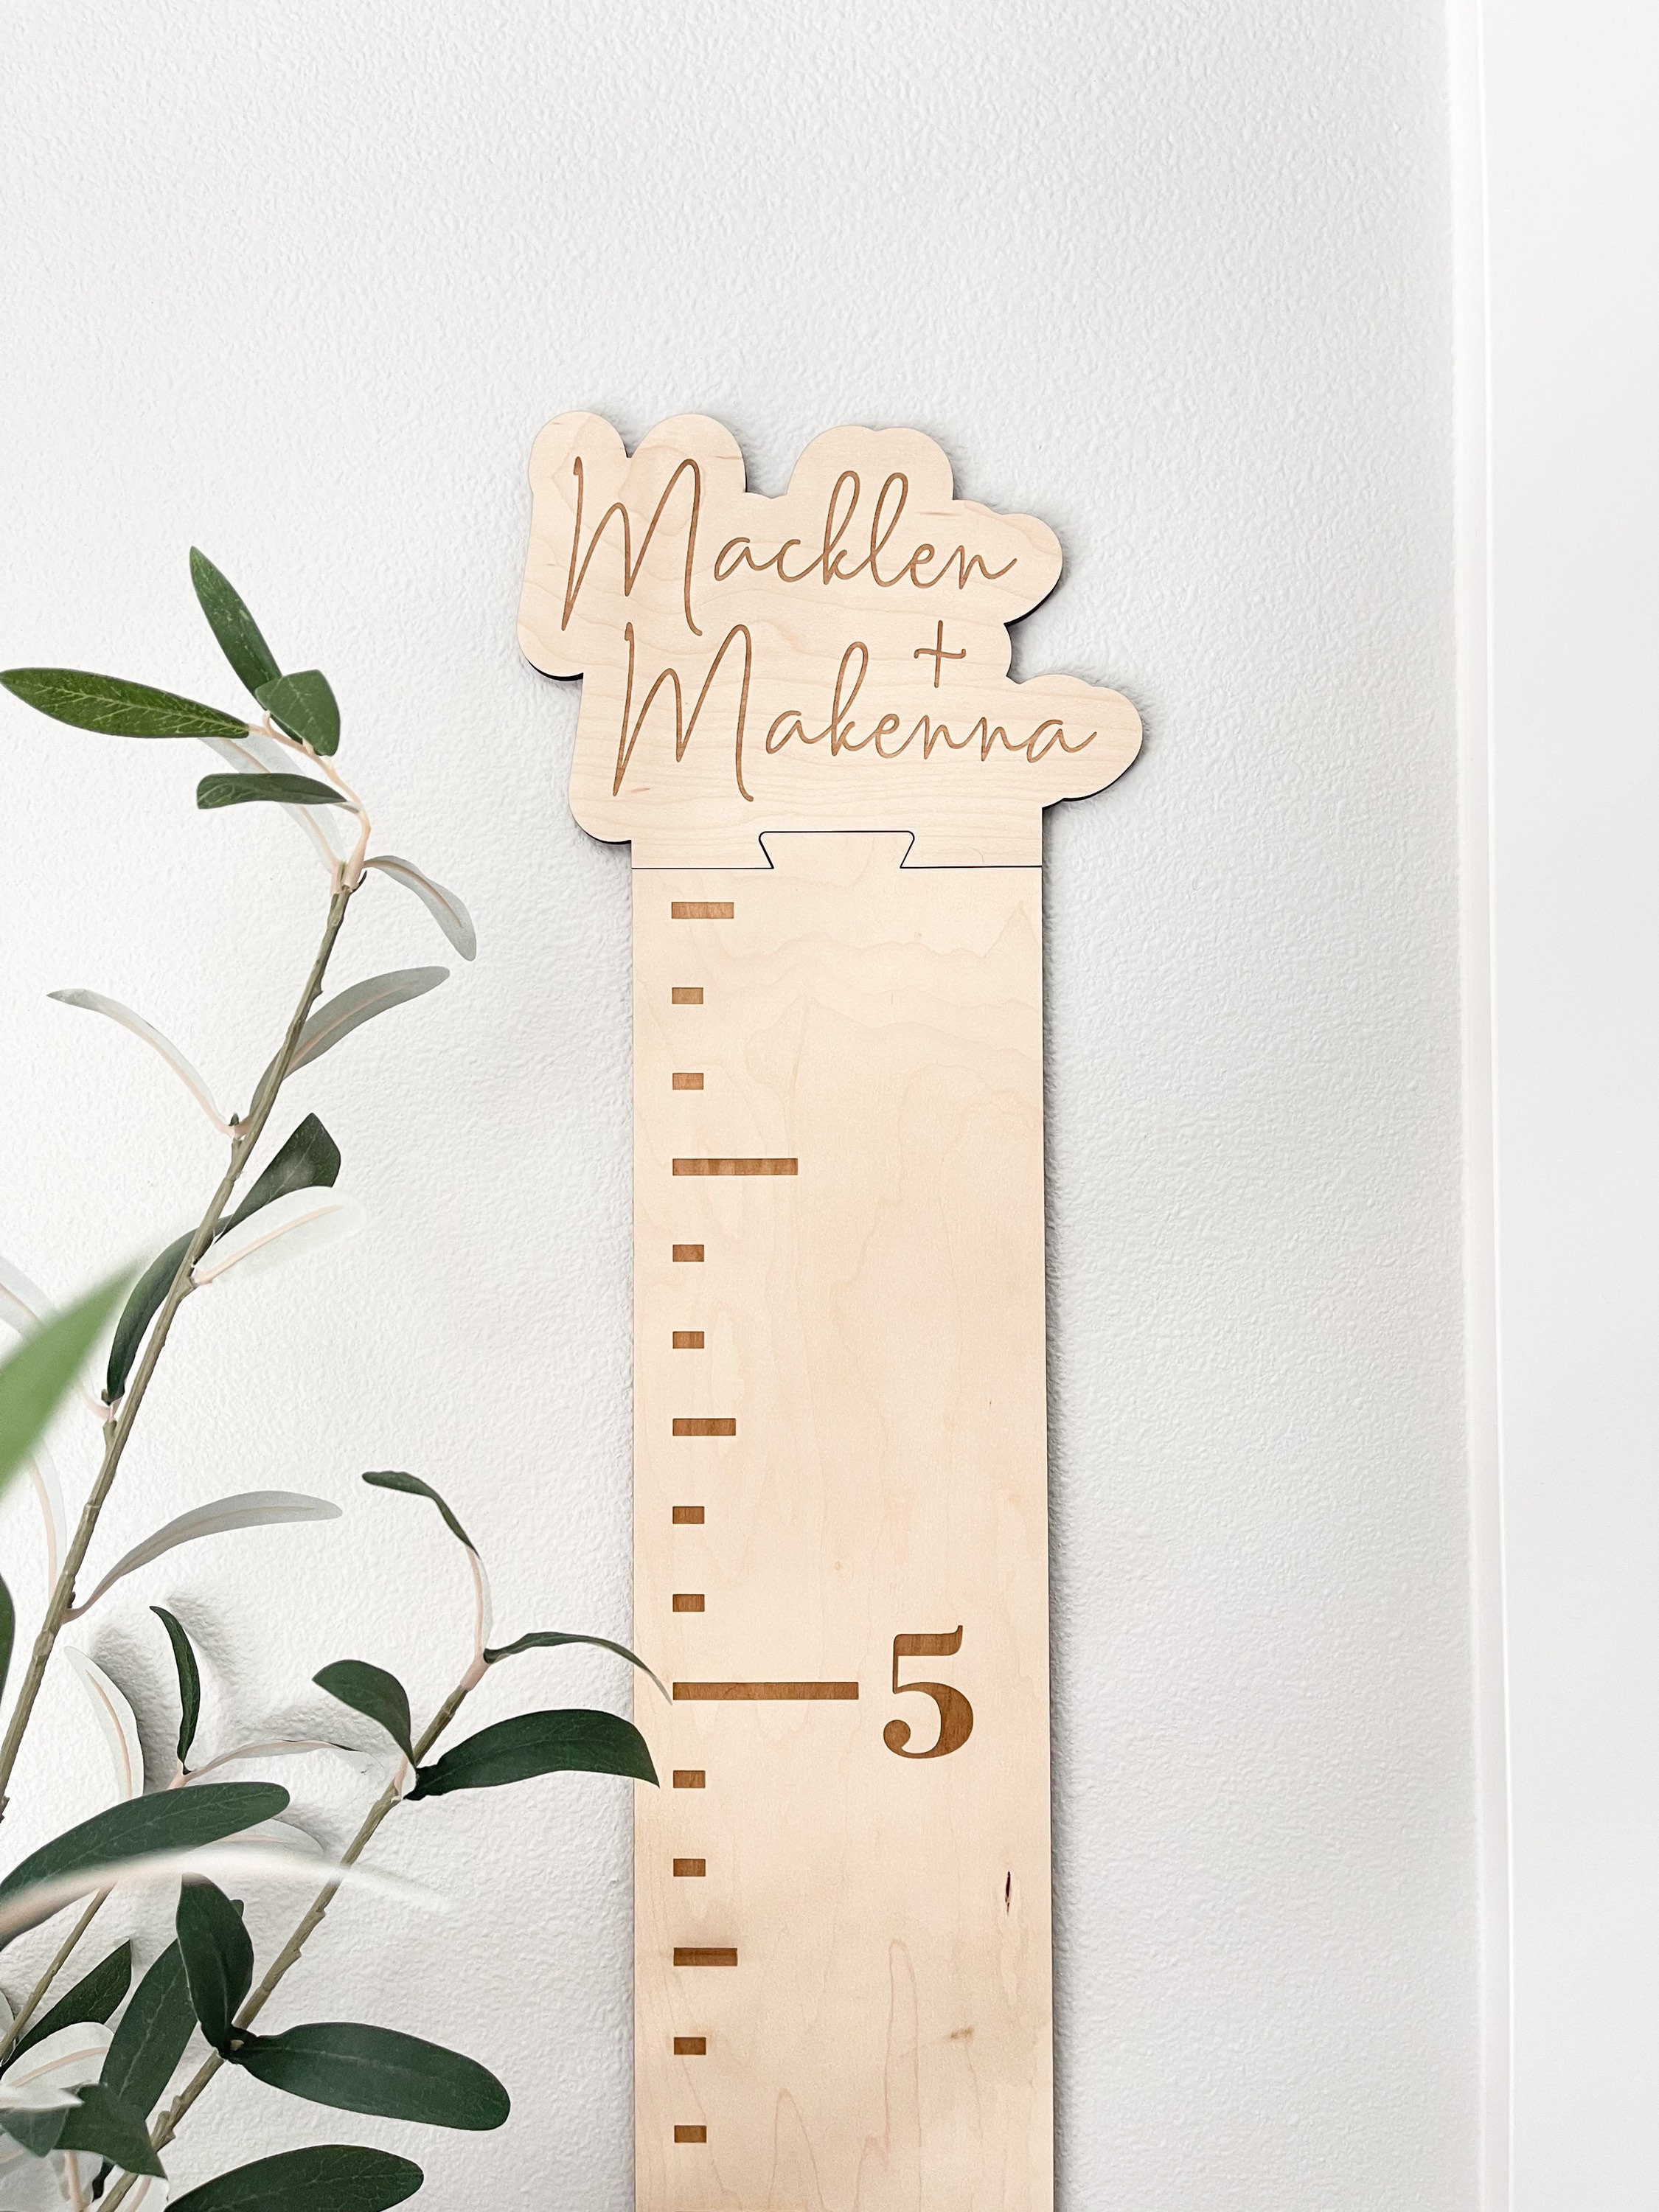 Personalized Wooden Growth chart, growth ruler, kids growth chart,  personalized growth chart, personalized ruler, kids ruler